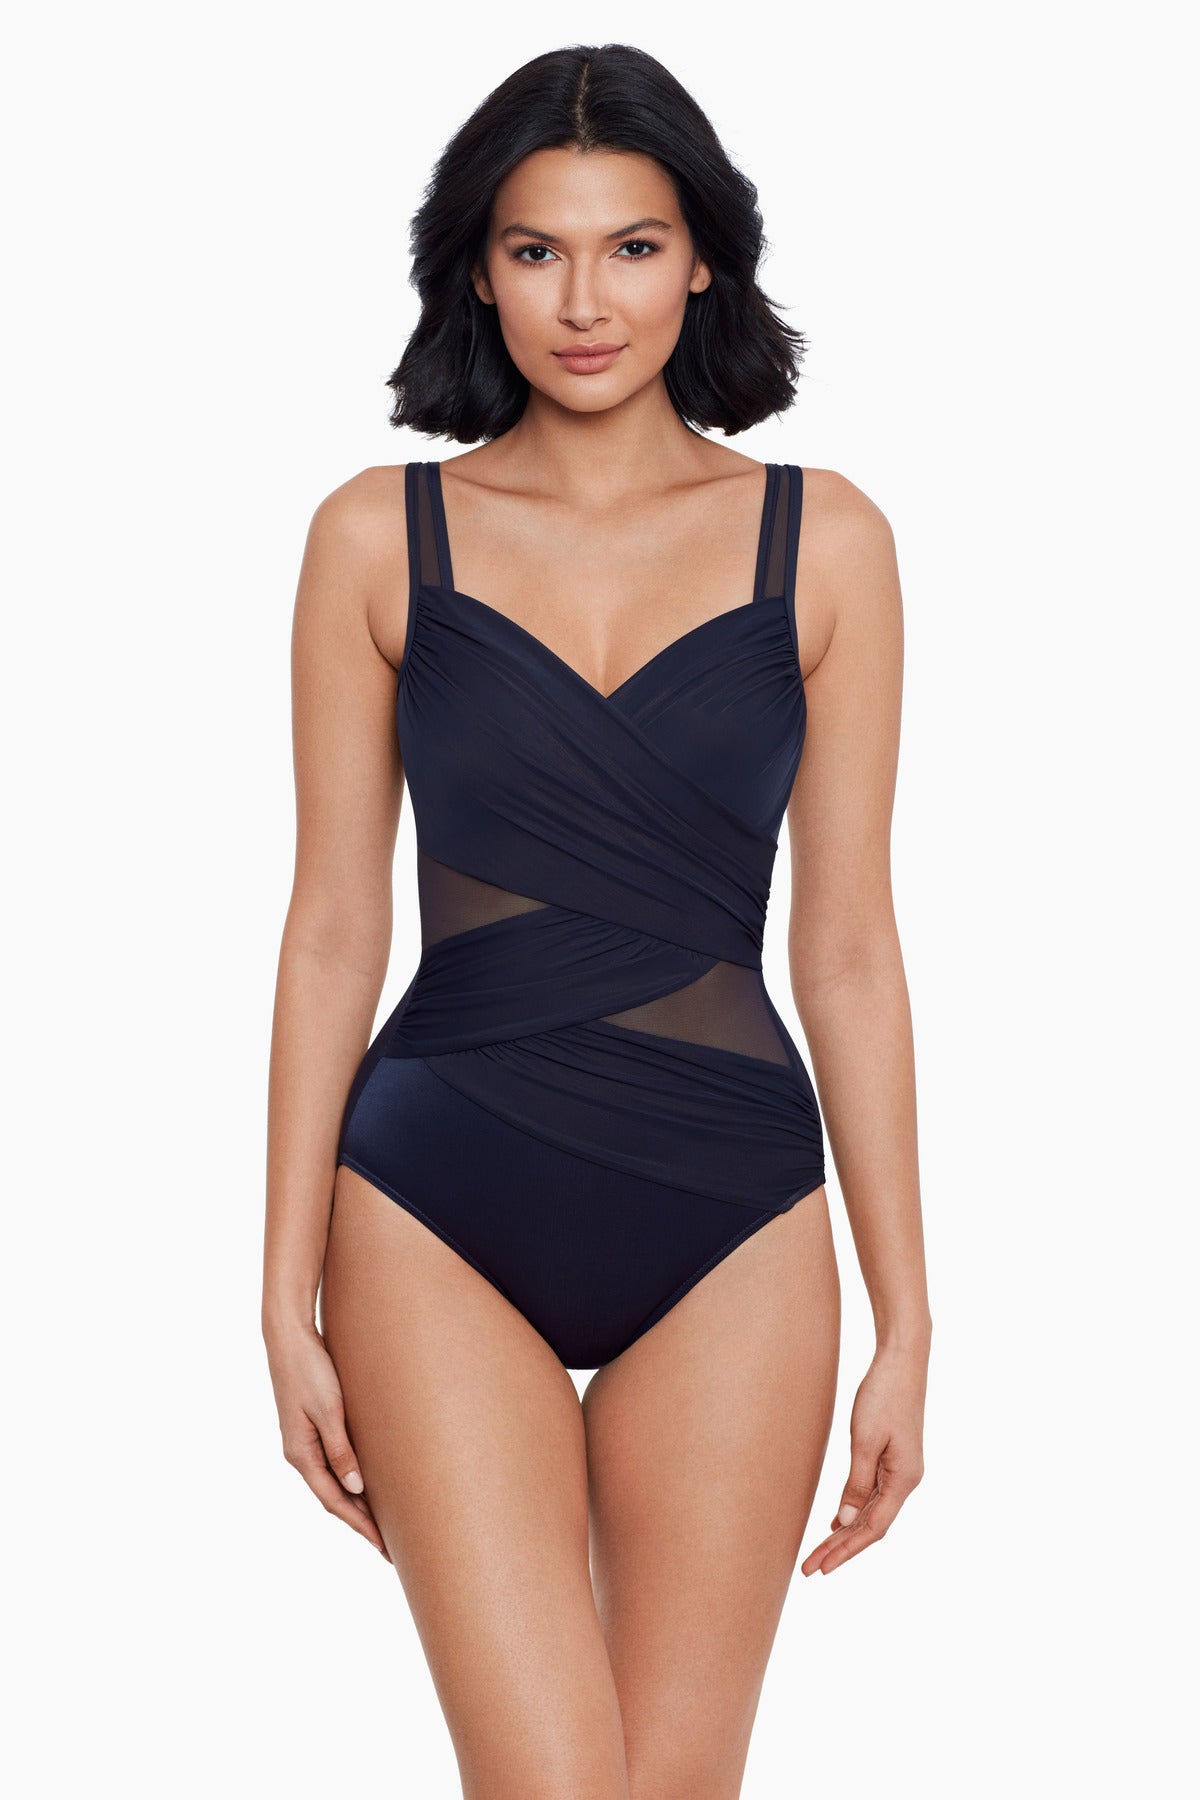 Miraclesuit Must Haves Sanibel Underwire One-Piece DDD-Cups, 10DDD